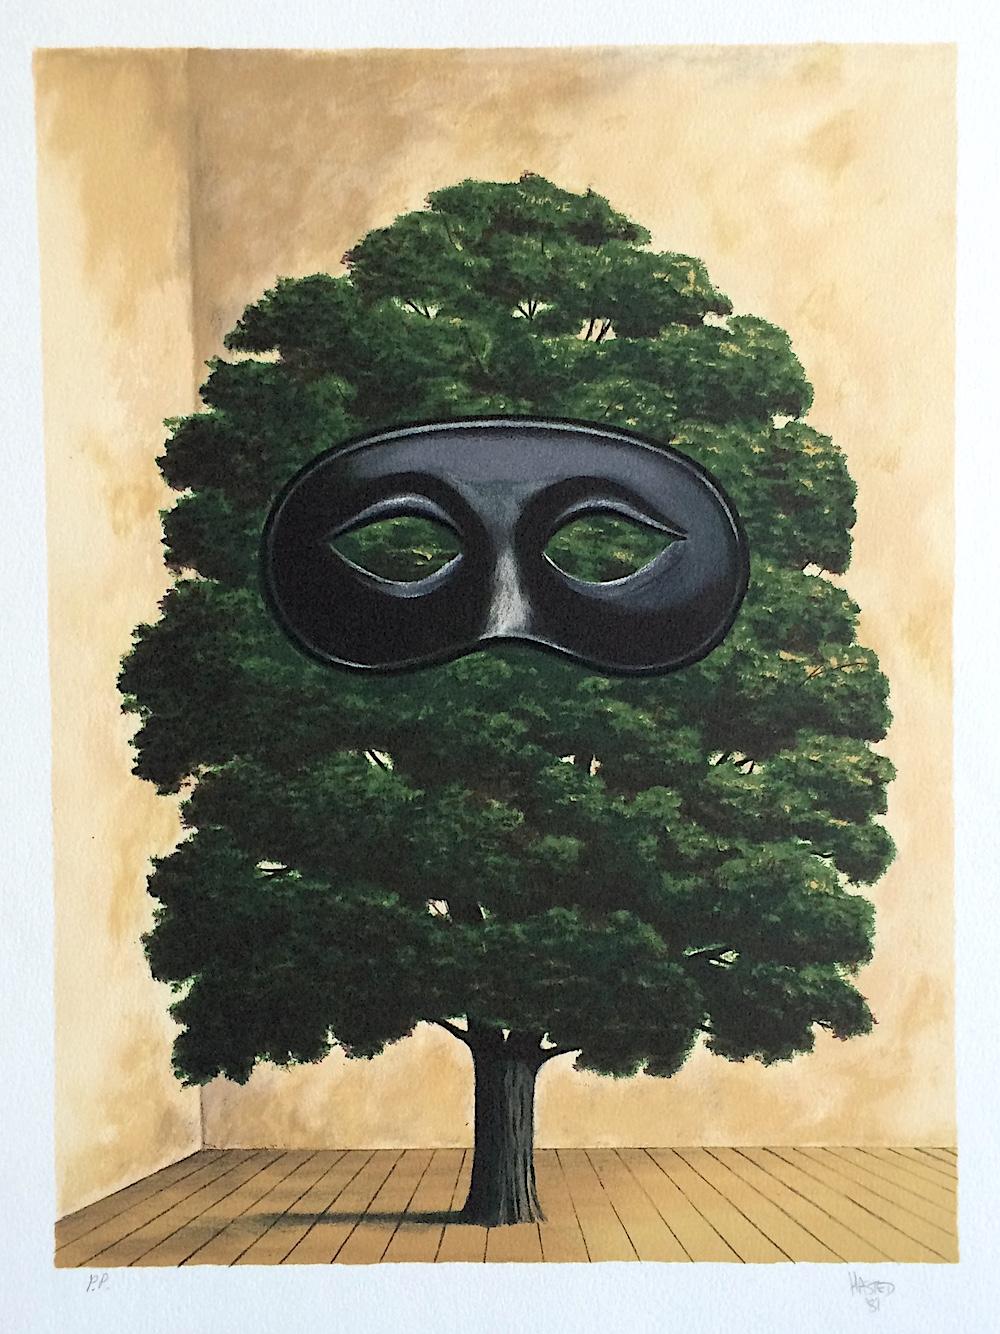 THE BIG PARADE Hand Drawn Lithograph, Surrealist Interior Scene, Tree w Mask,  - Print by Michael Hasted